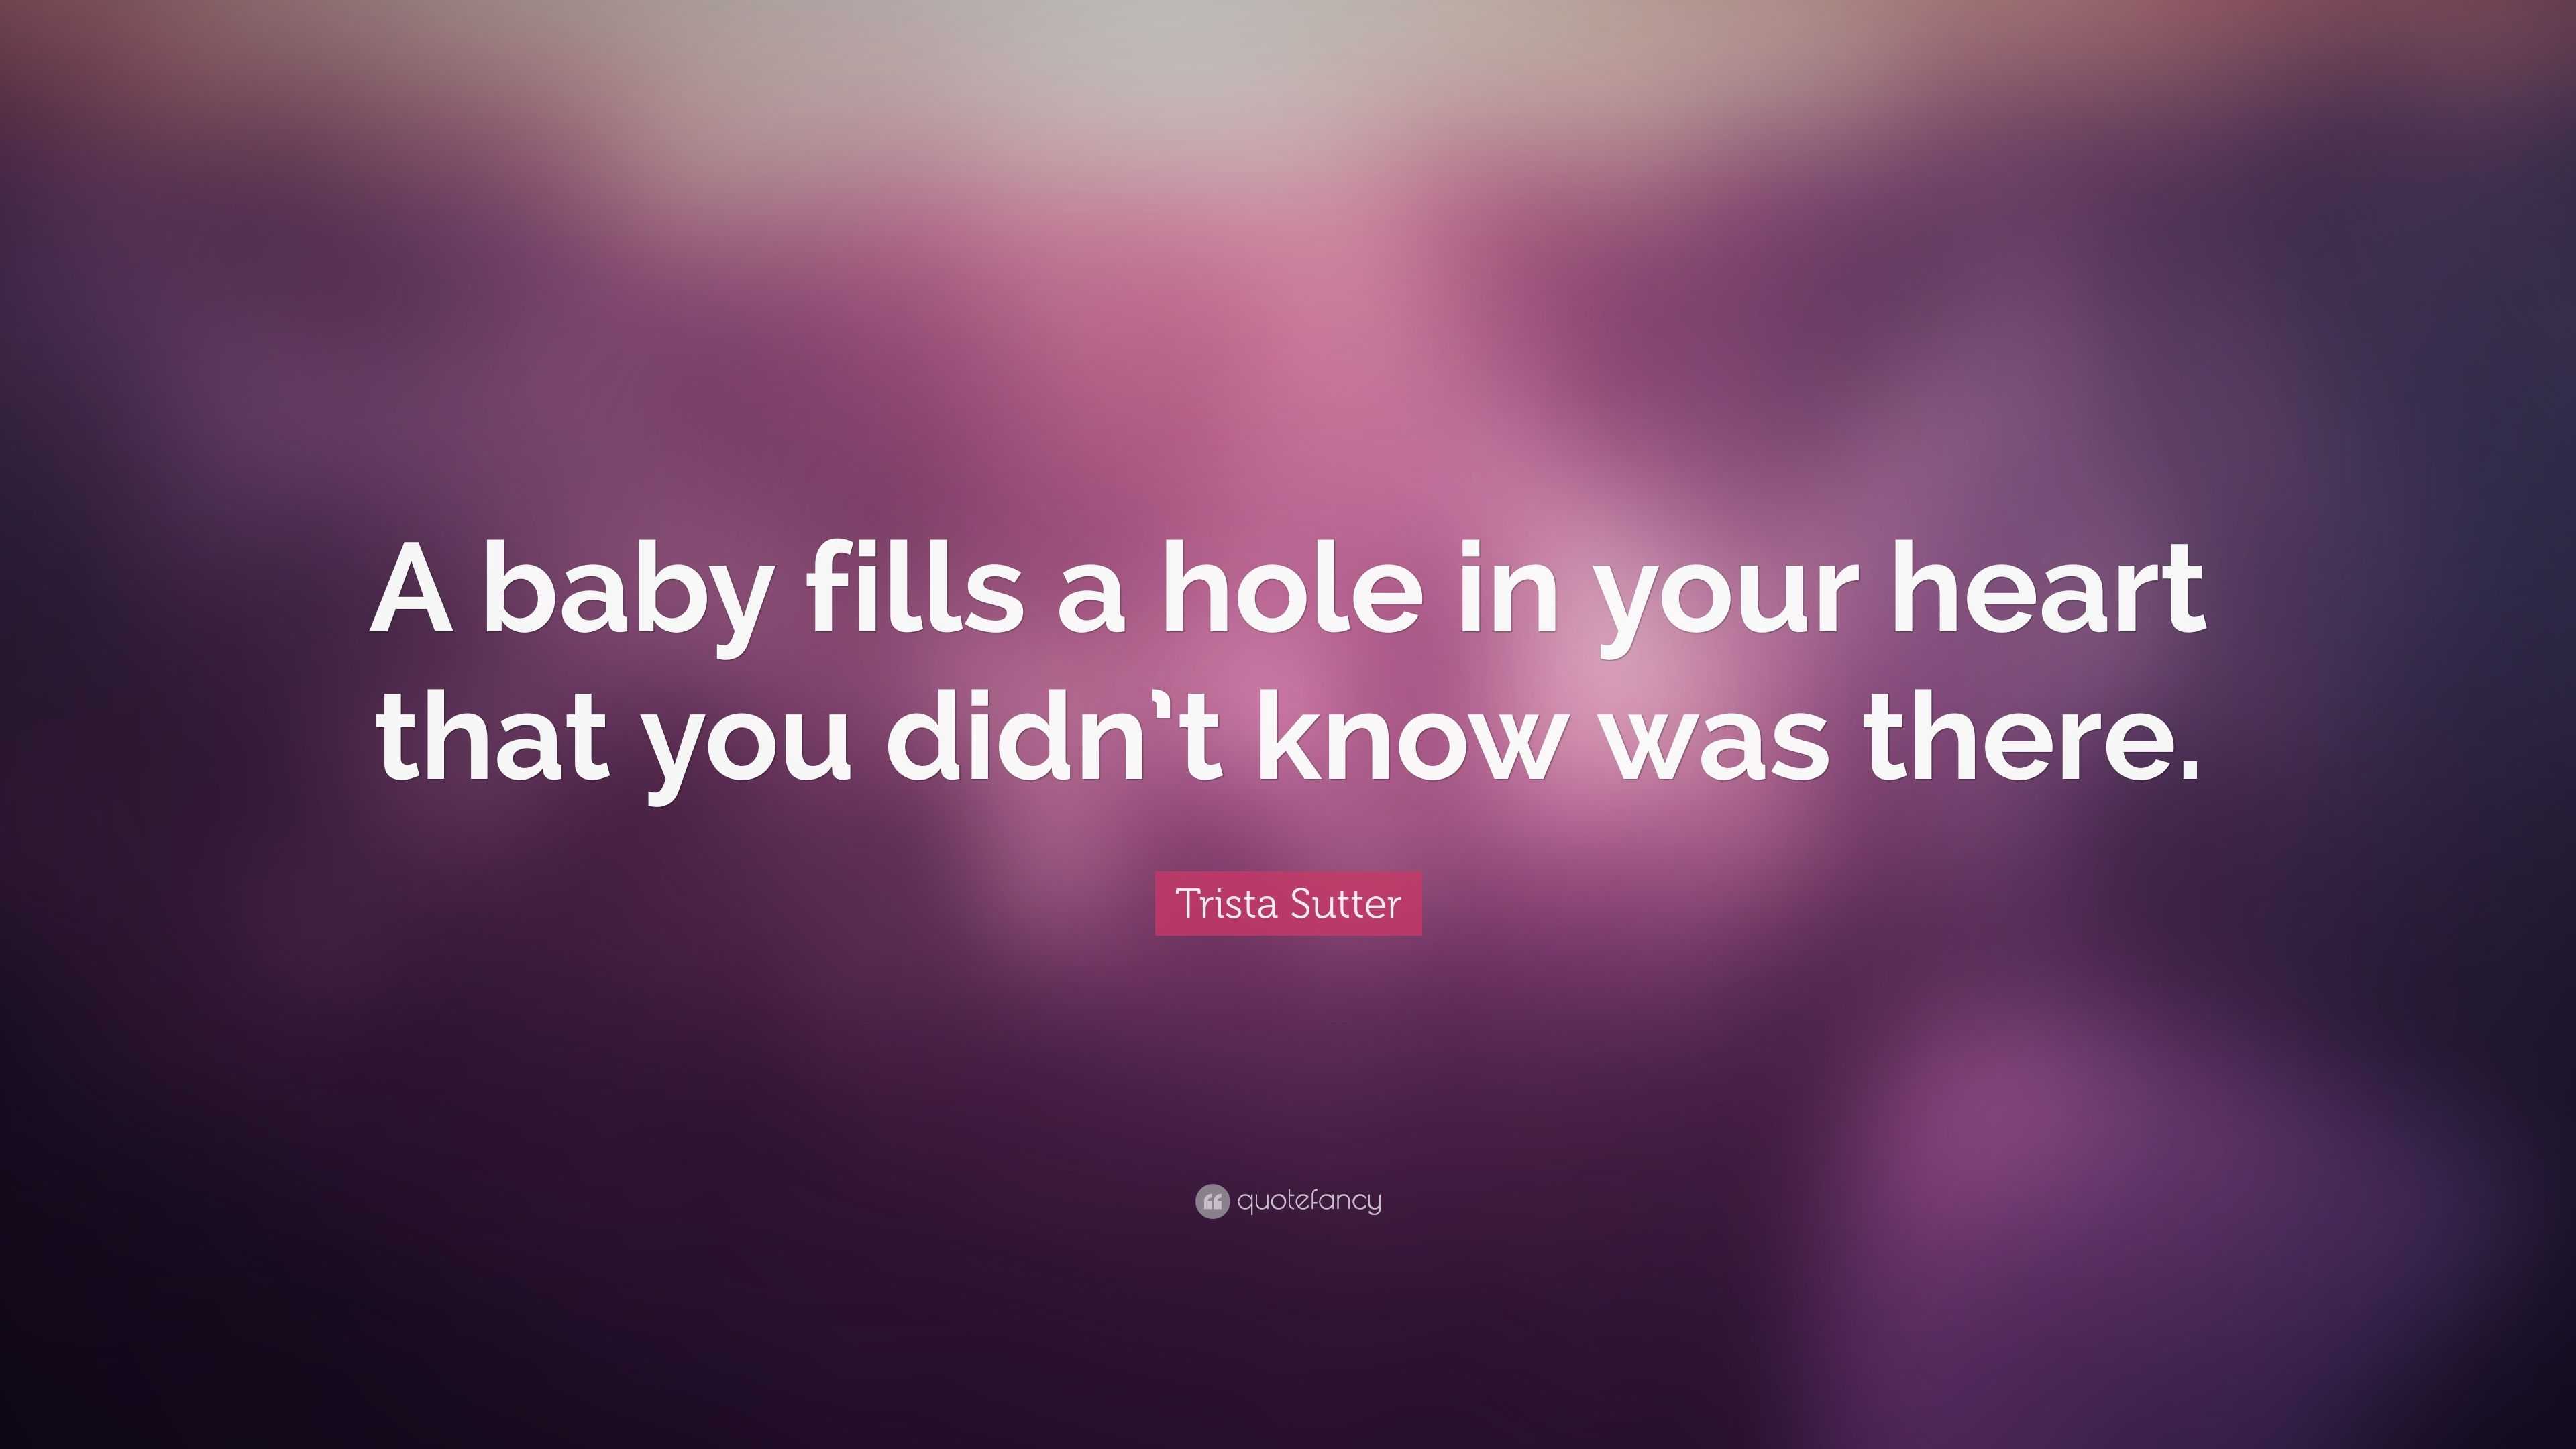 Trista Sutter Quote: “A baby fills a hole in your heart that you didn’t ...